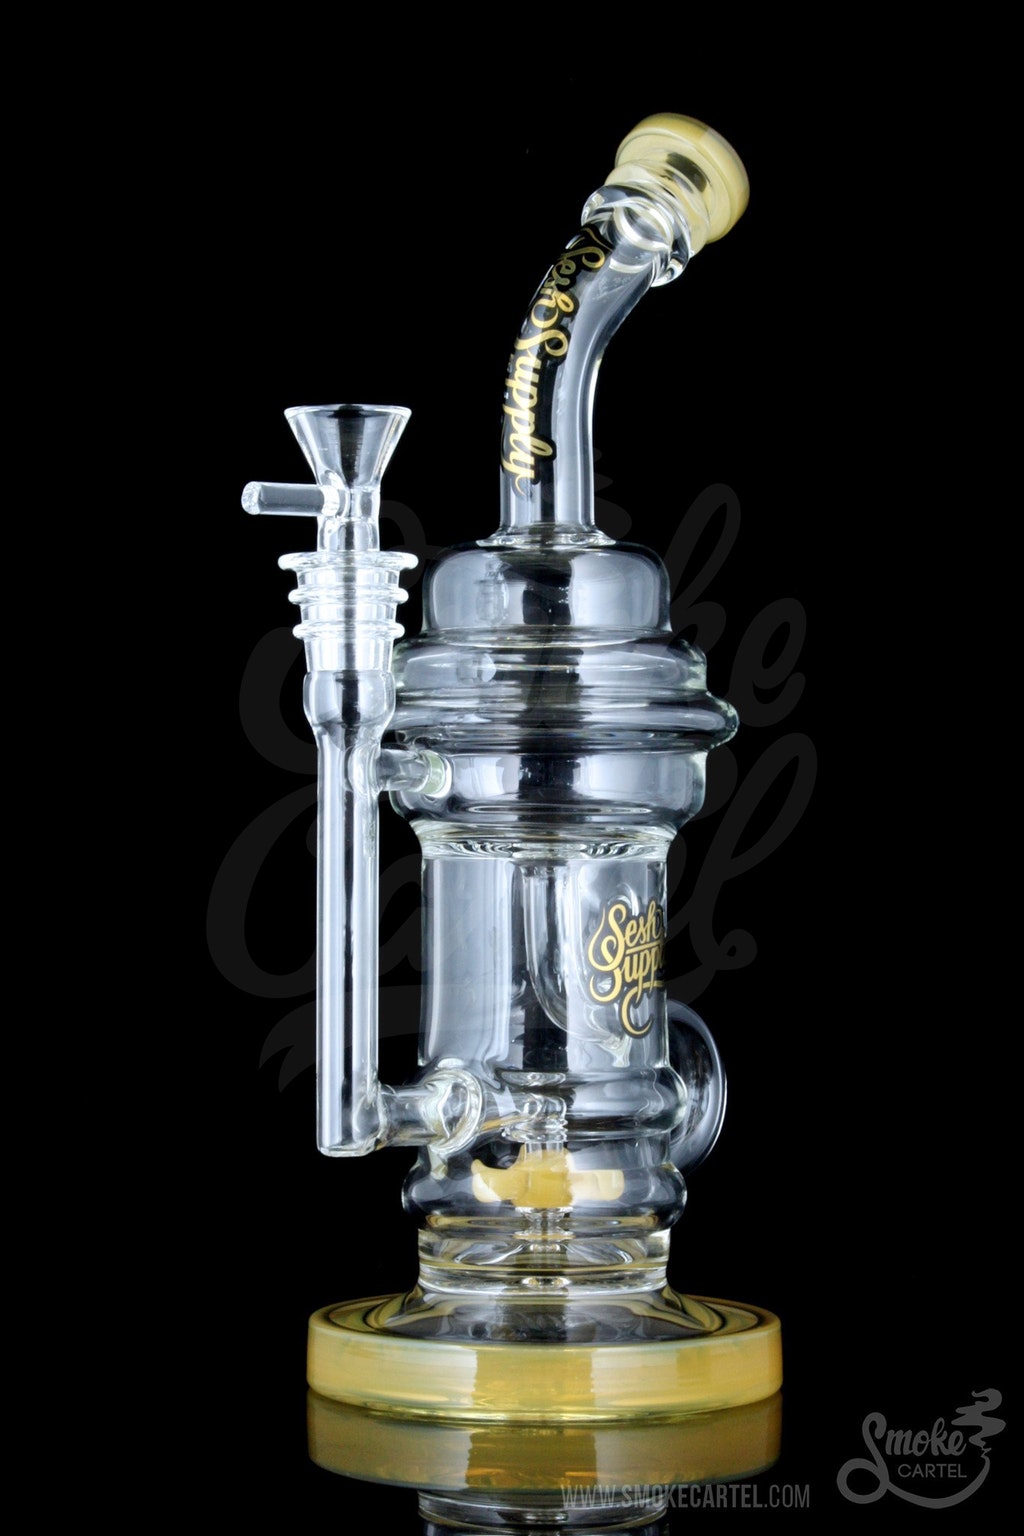 Treat Yourself to One Of Our Cool Bongs For Sale...